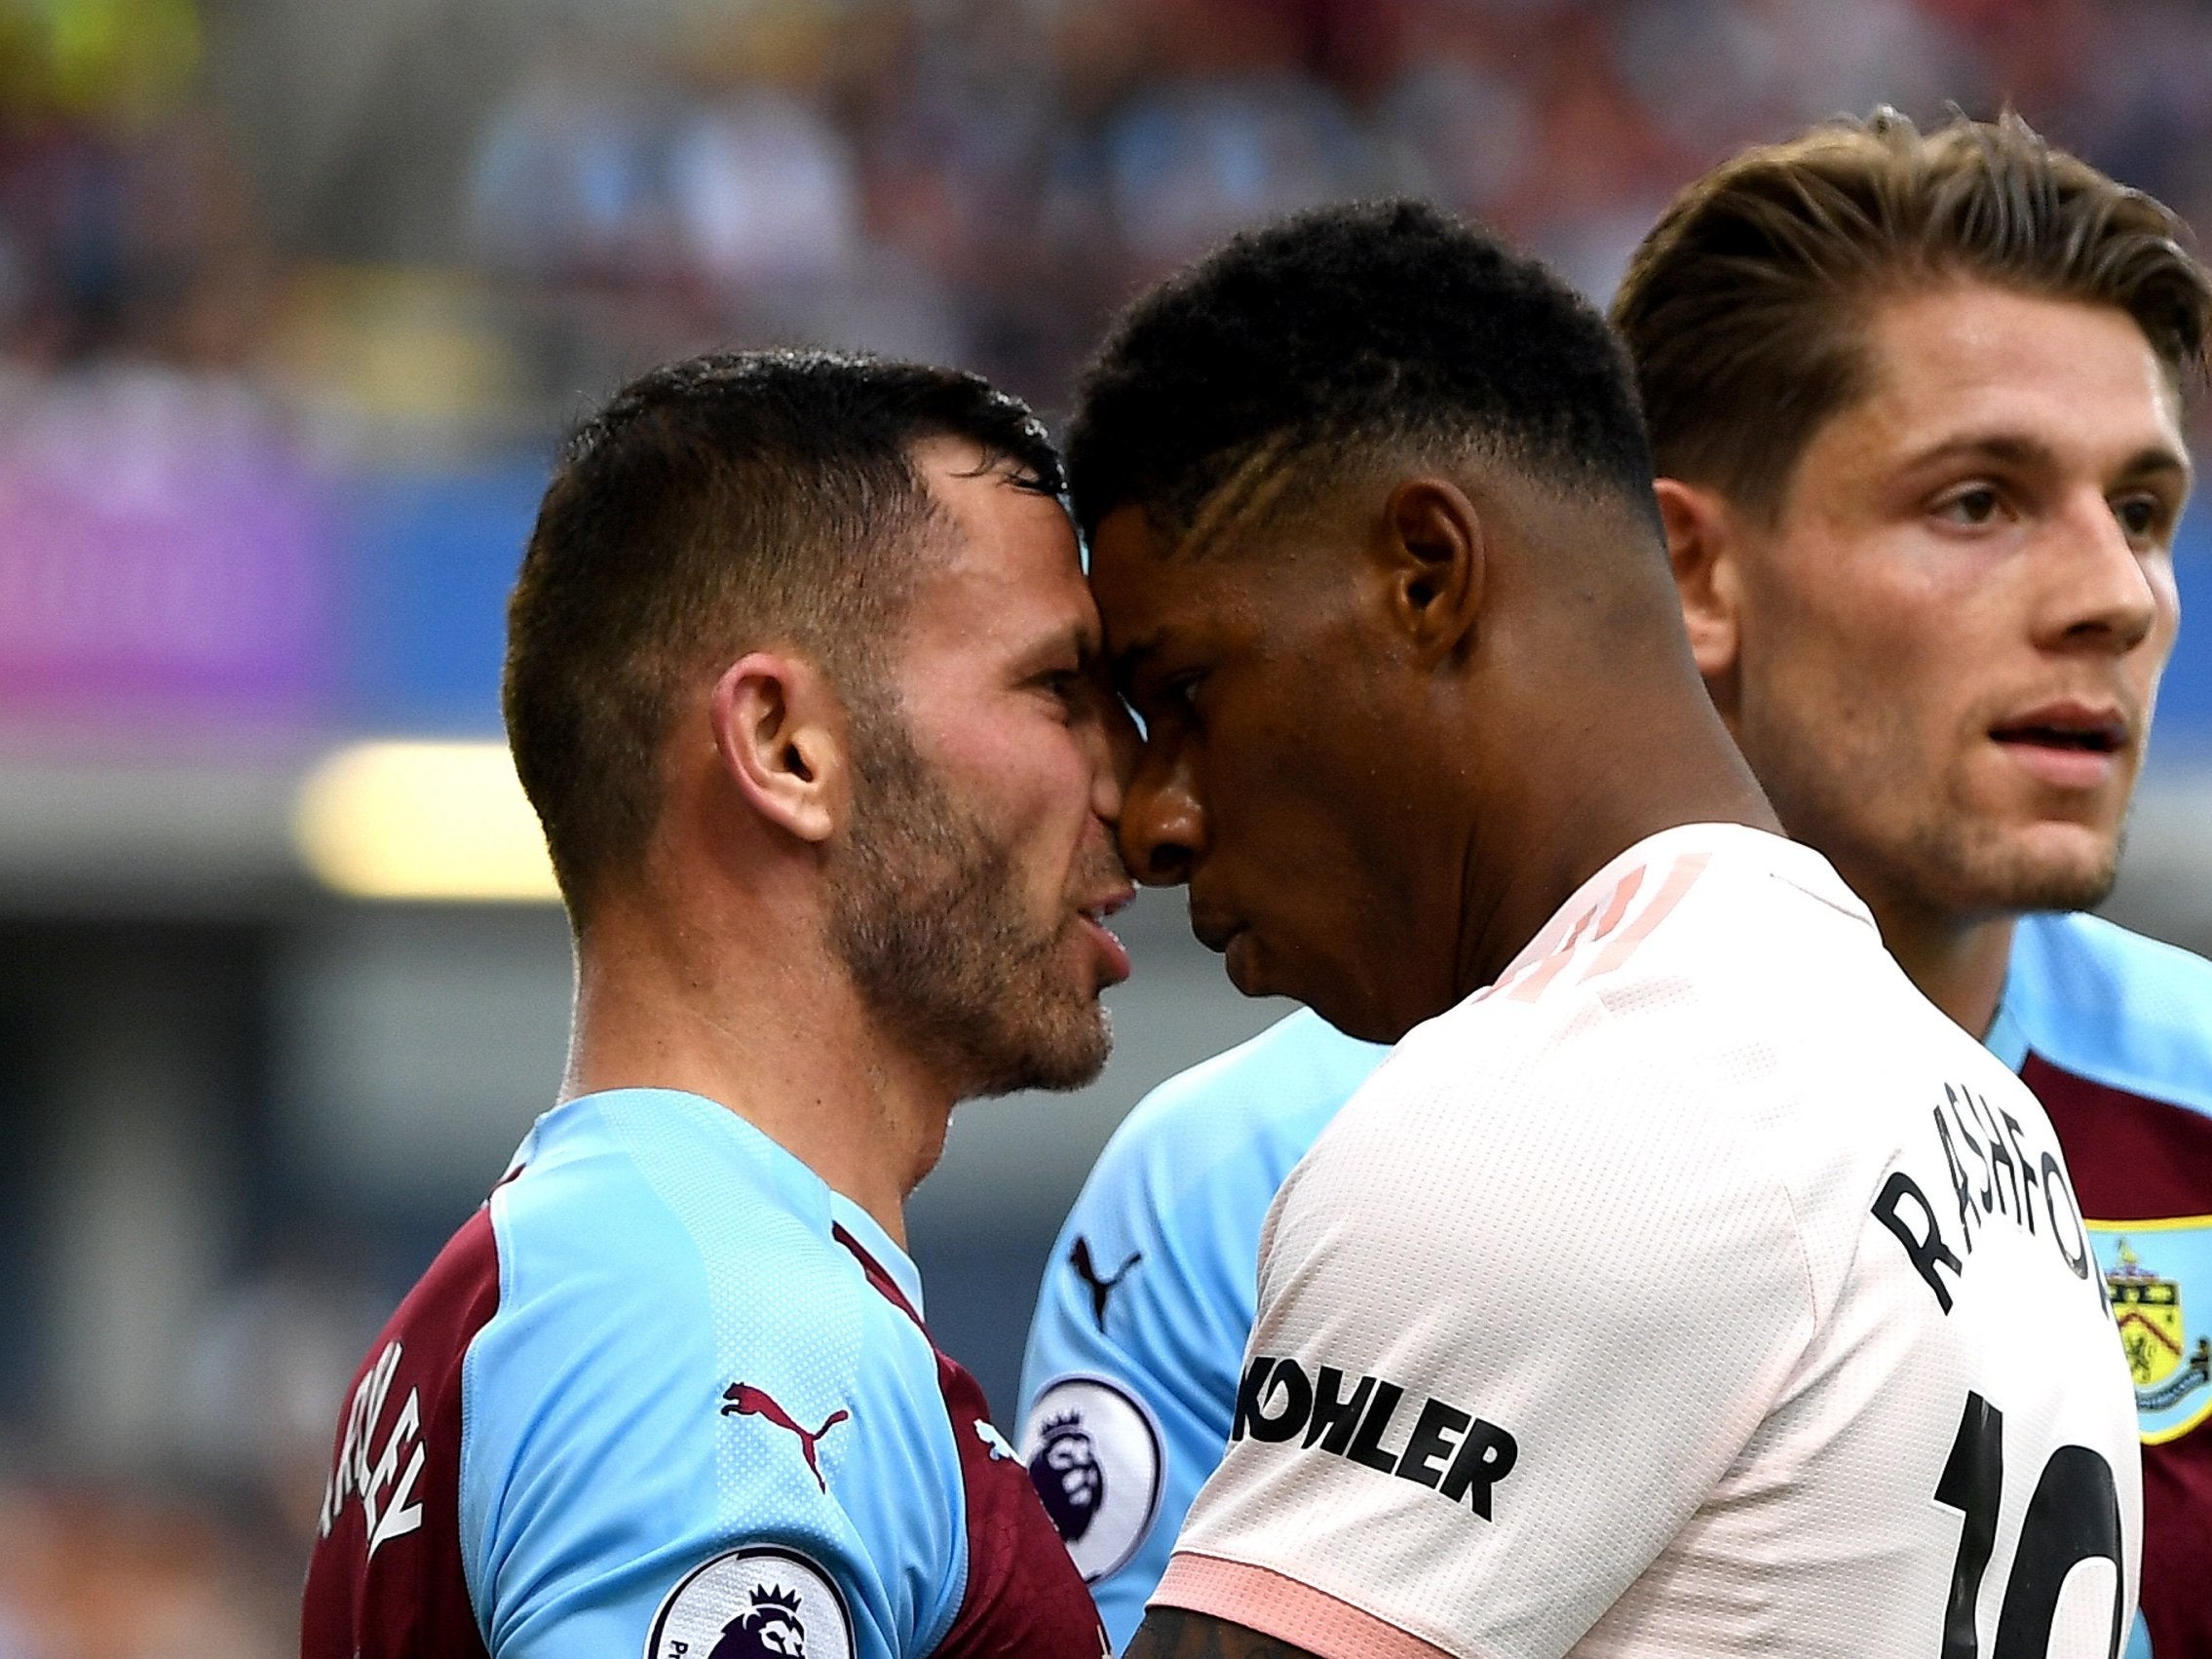 Marcus Rashford was sent-off during Manchester United’s victory over Burnley